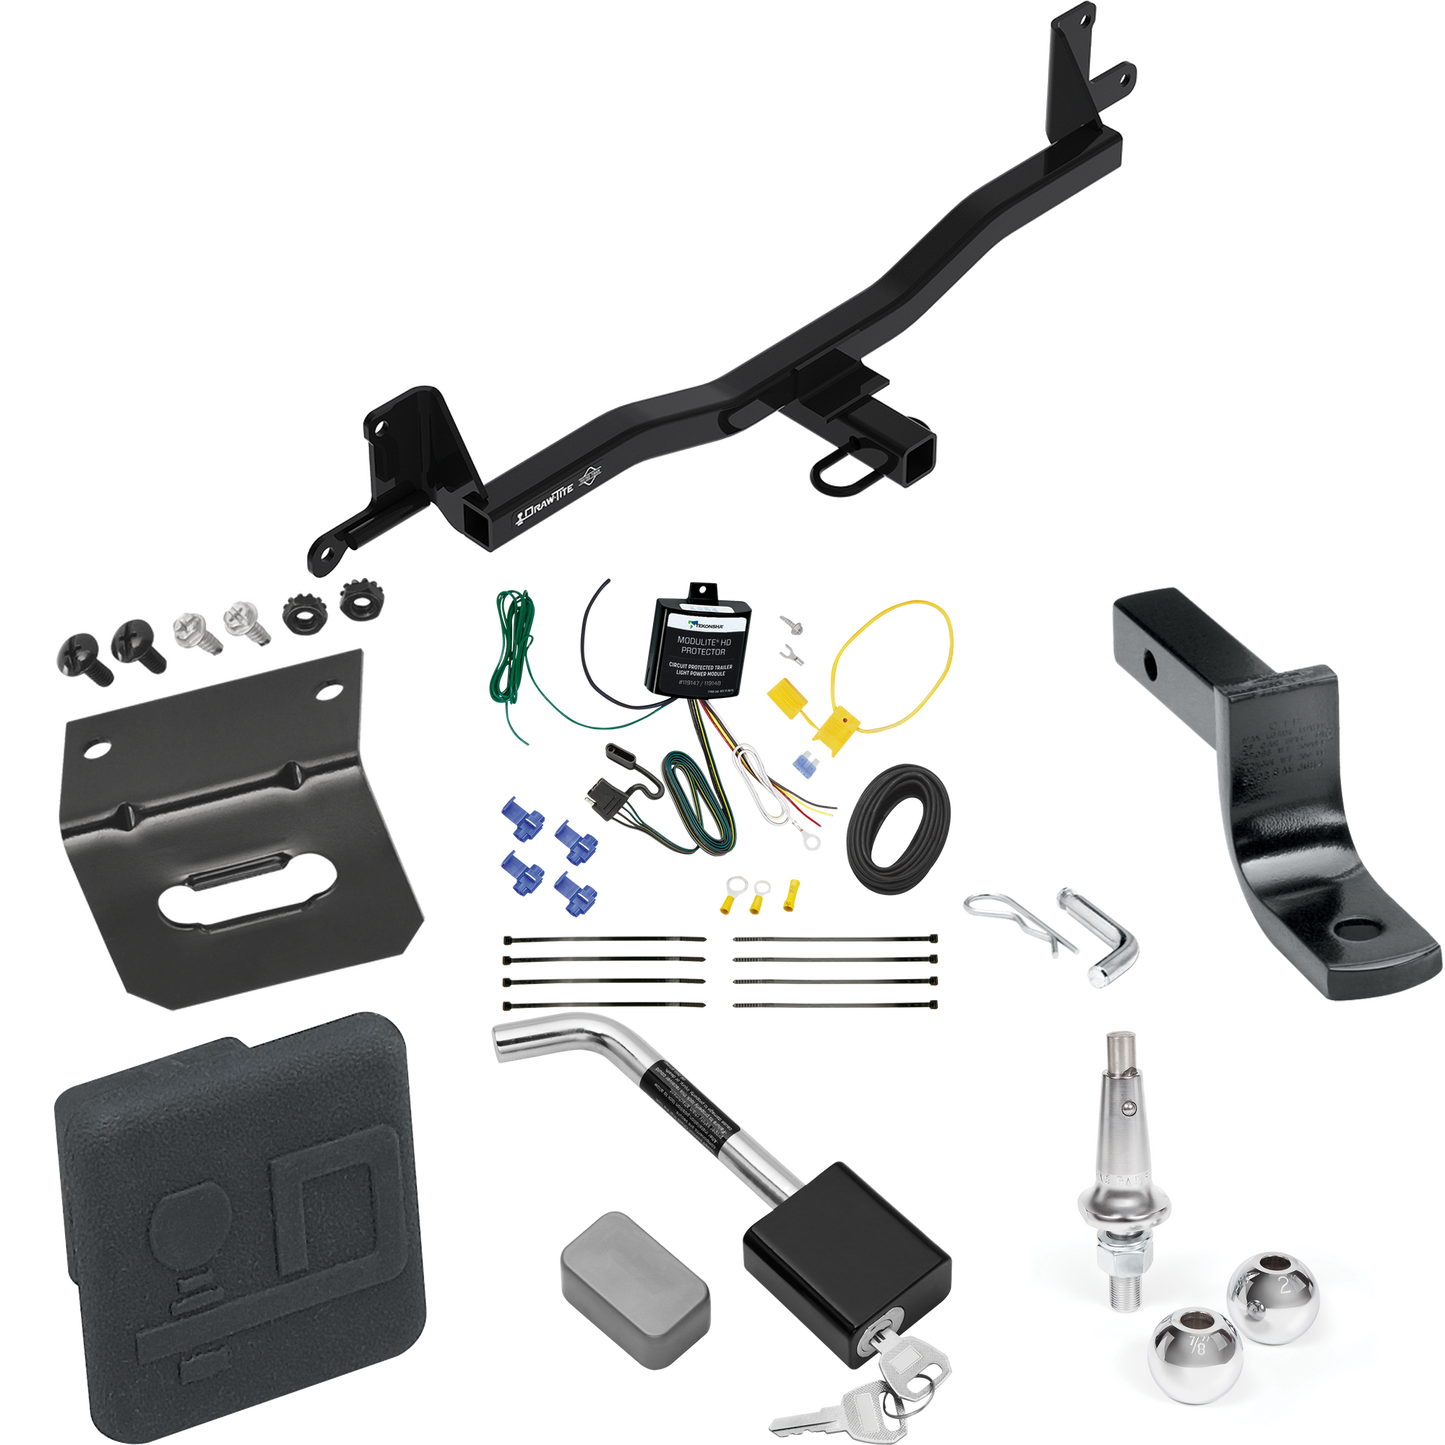 Fits 2012-2019 Toyota Prius C Trailer Hitch Tow PKG w/ 4-Flat Wiring Harness + Draw-Bar + Interchangeable 1-7/8" & 2" Balls + Wiring Bracket + Hitch Cover + Hitch Lock By Draw-Tite